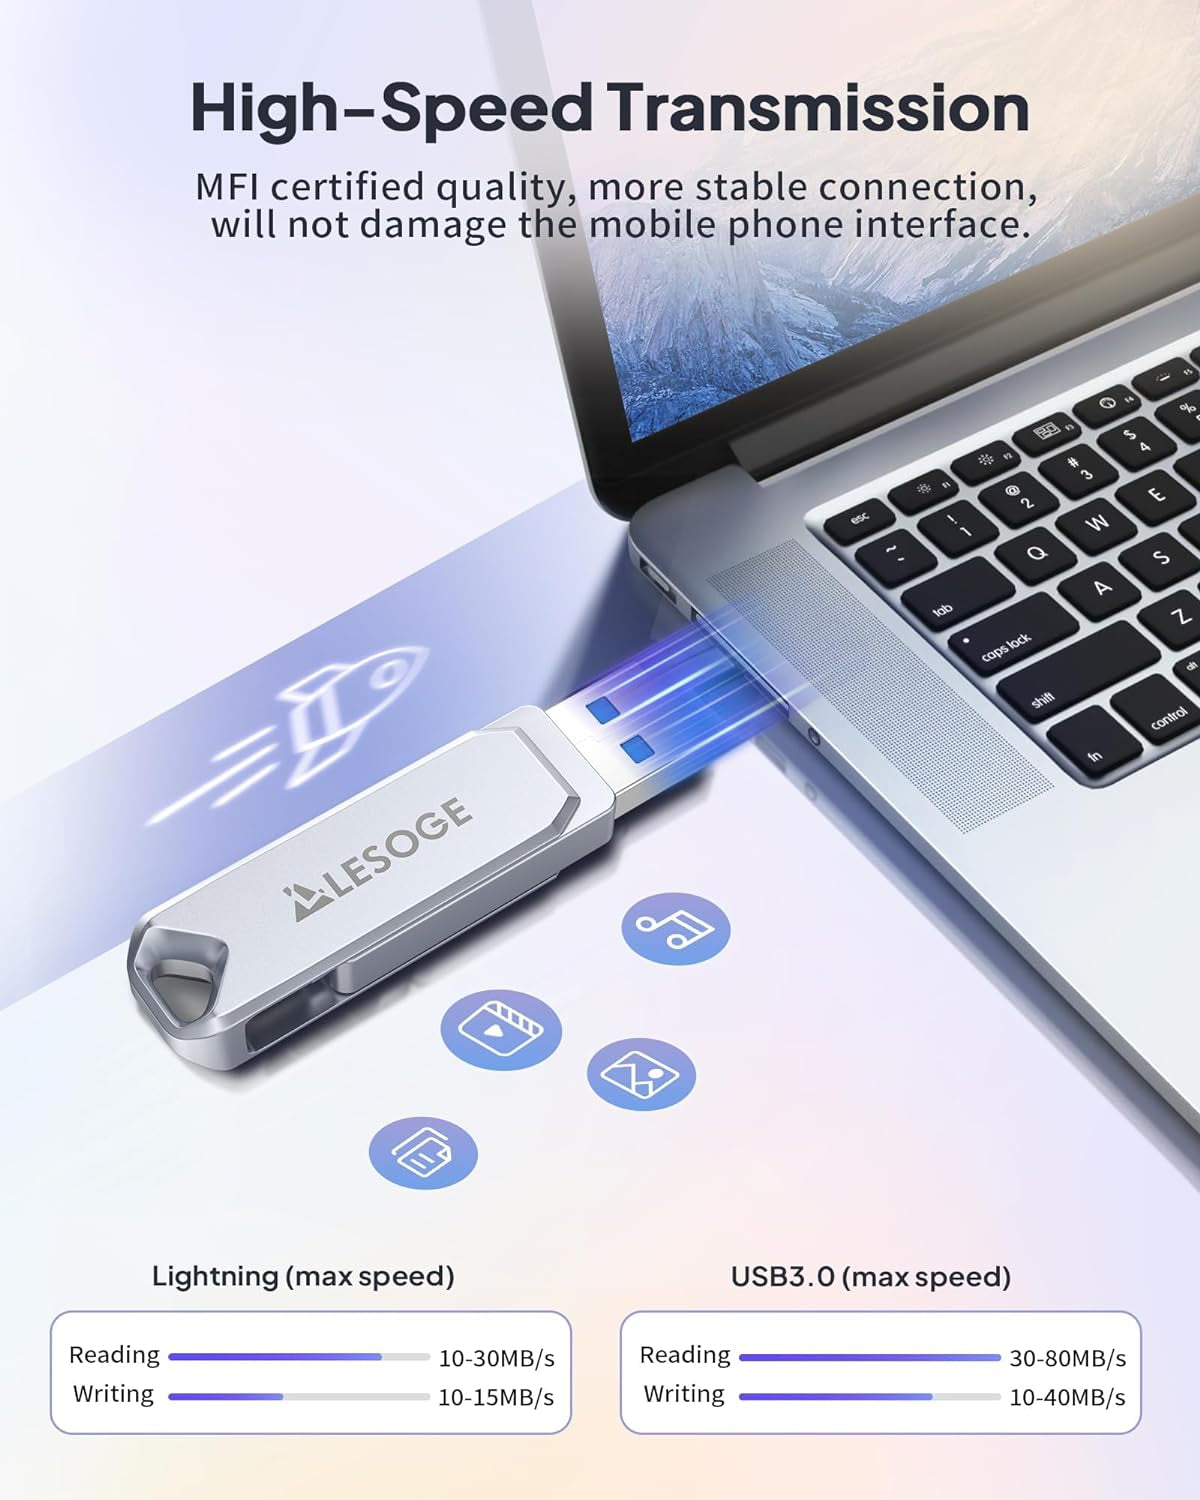 Mfi Certified 128GB Flash Drive for Iphone Photo Stick USB Memory Stick Thumb Drives, High Speed USB Stick External Storage for Iphone/Ipad/Android/Pc